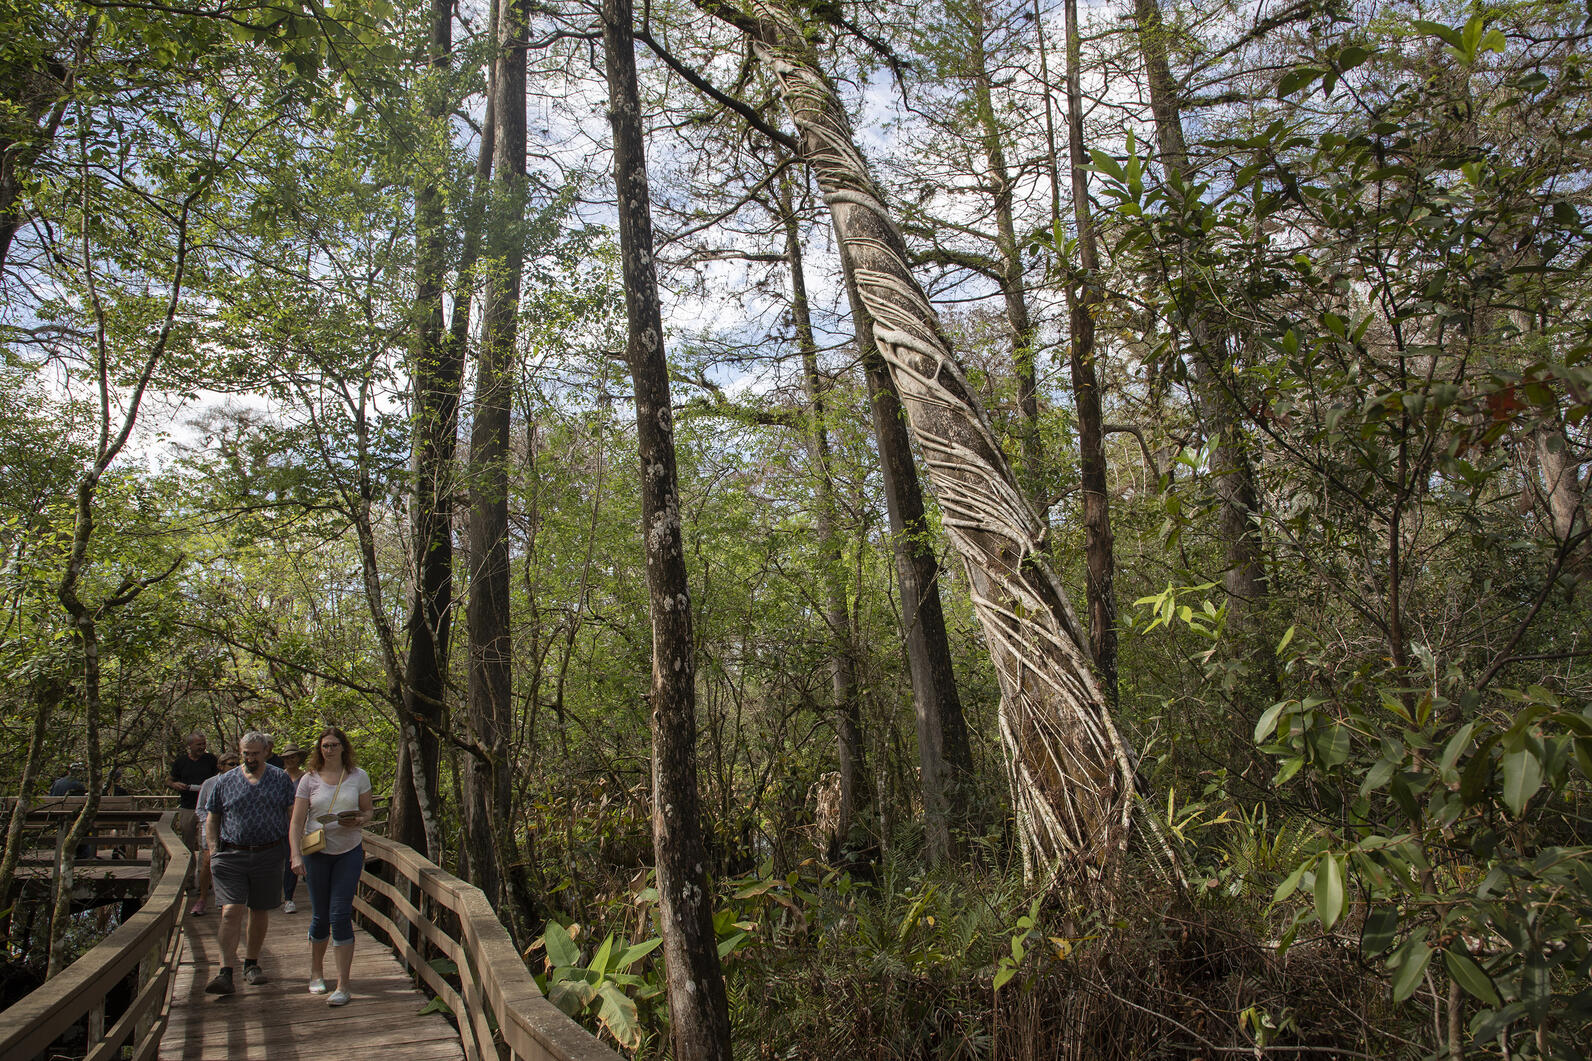 Photo of people walking on the boardwalk next to a giant bald cypress tree.